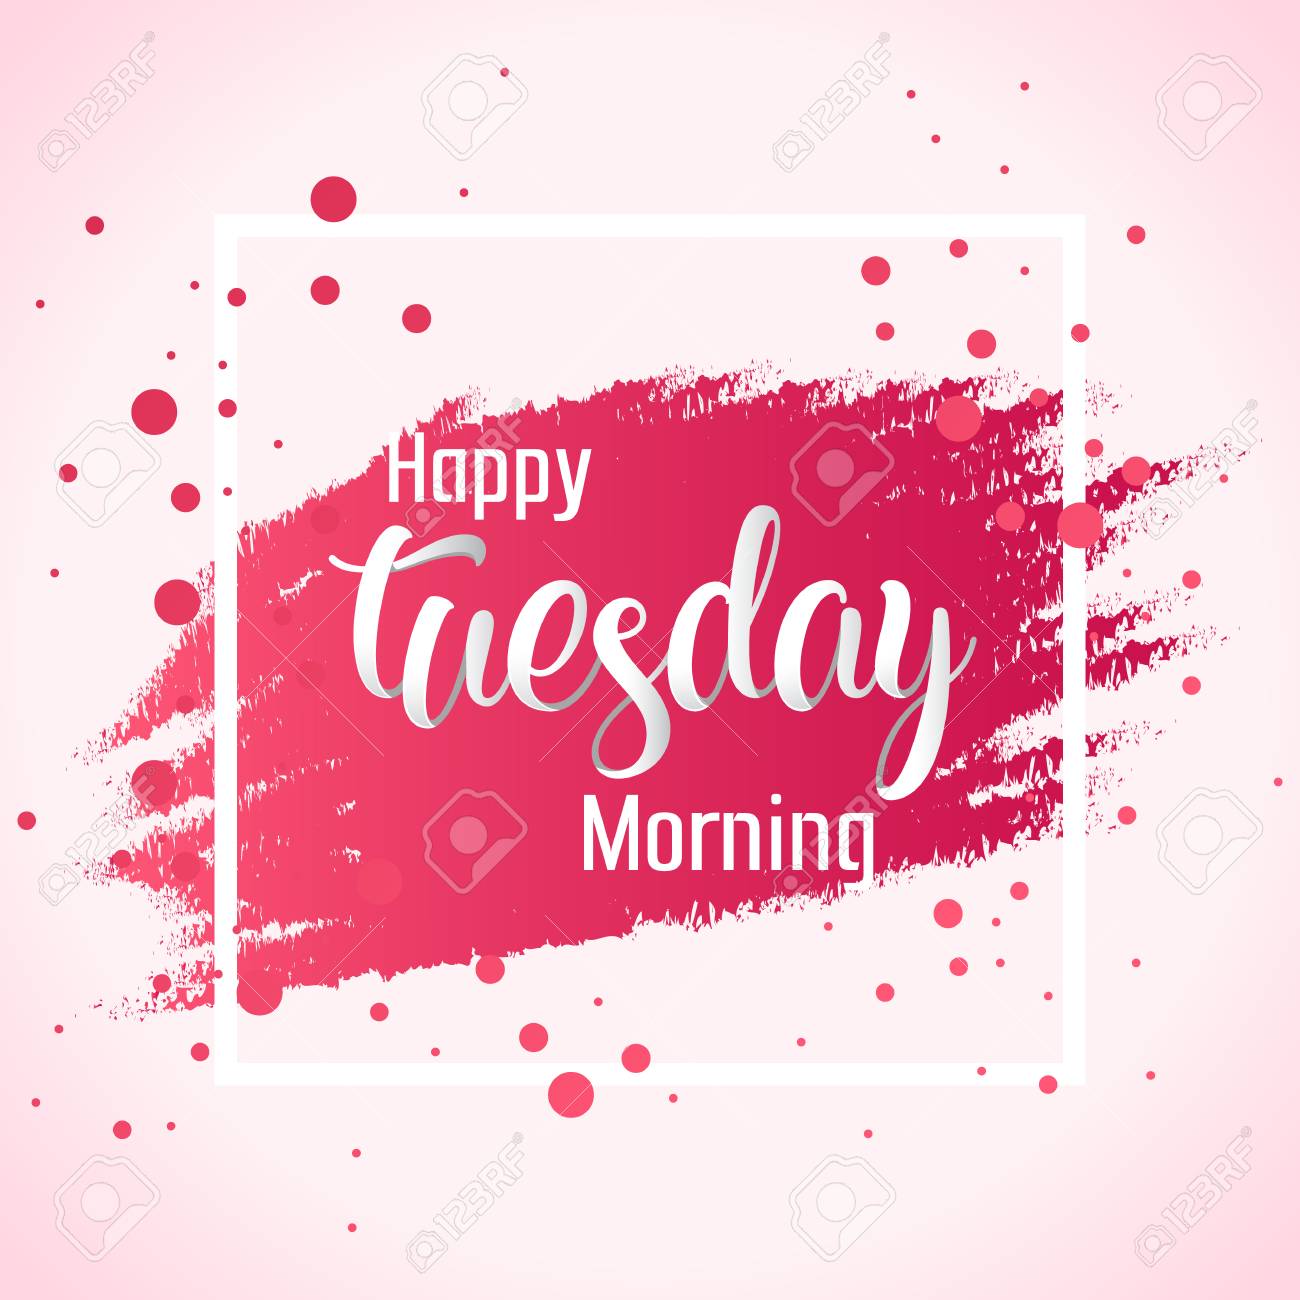 105943065-abstract-happy-tuesday-morning-background-illustration-vector-concept-design.jpg